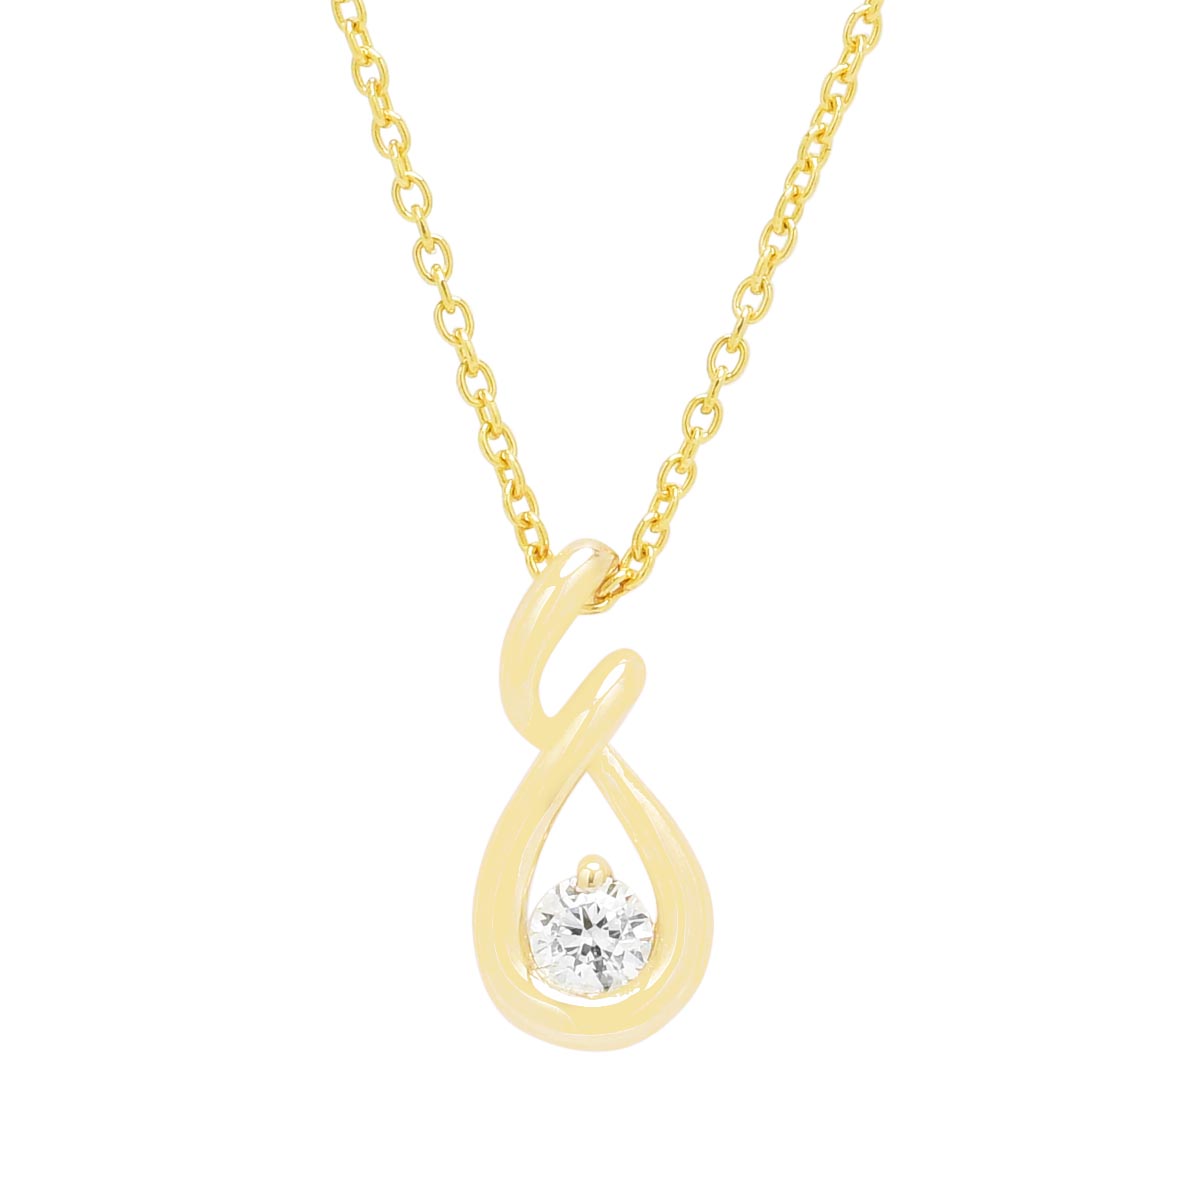 Northern Star Diamond Embrace Collection Necklace in 10kt Yellow Gold (1/10ct)